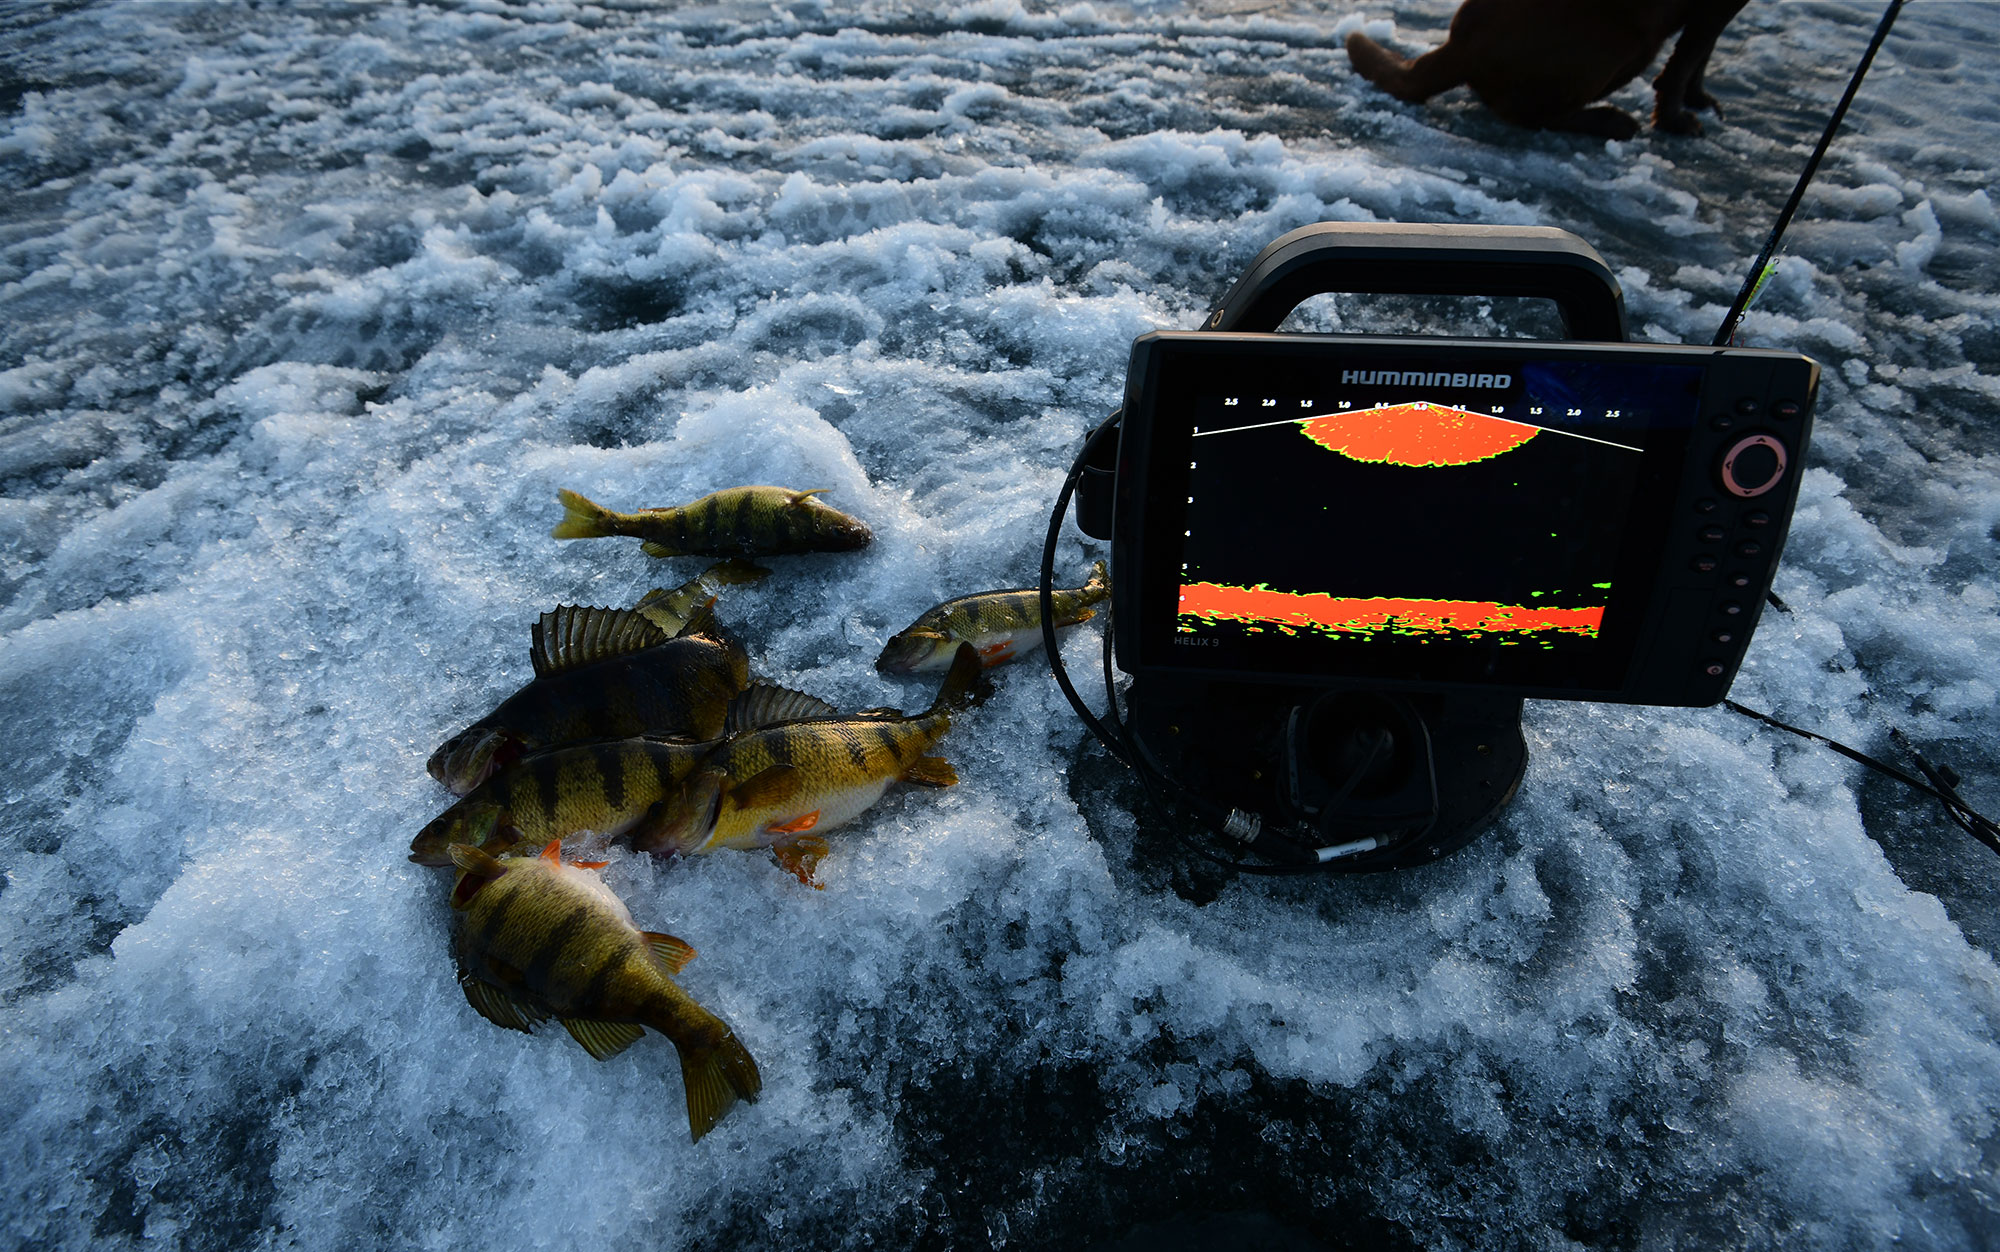 Forward-facing sonar is an angling game changer, part 1